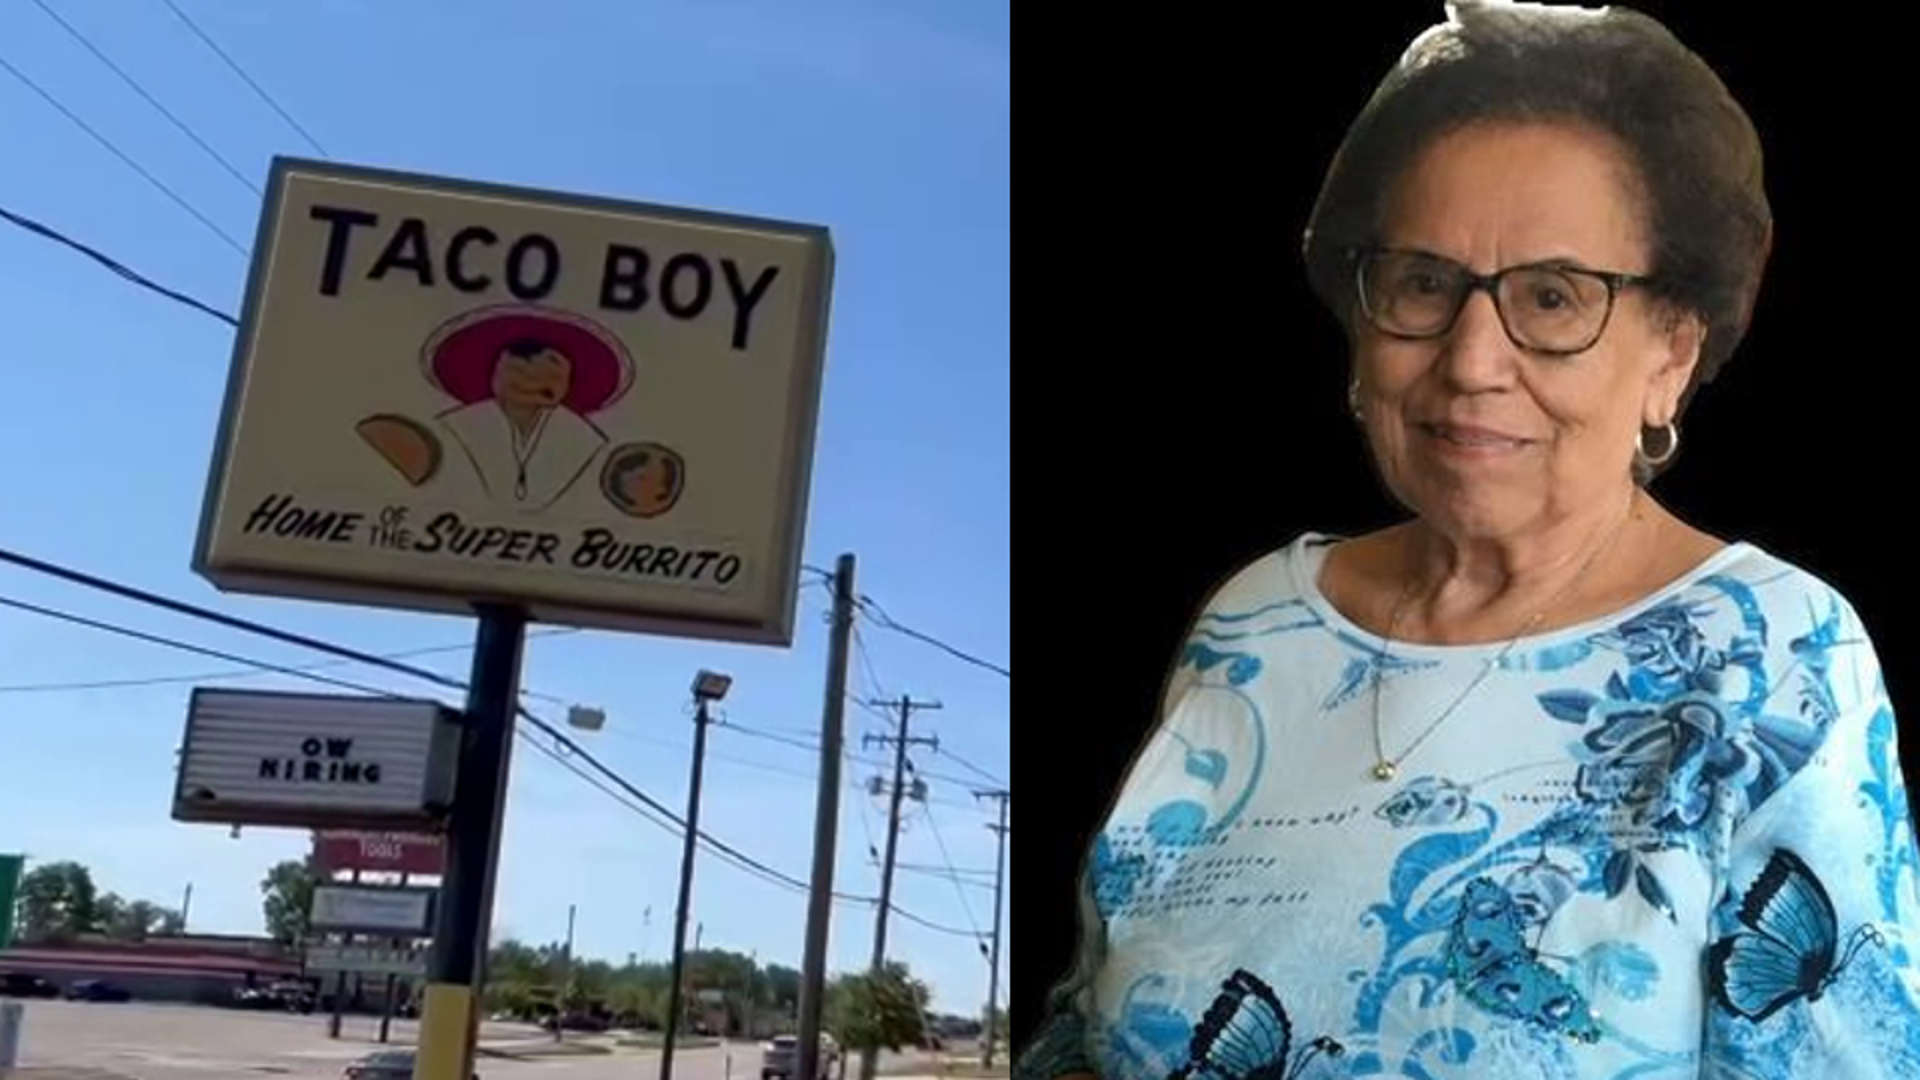 Juanita Baltierrez, 92, and her husband Robert Baltierrez launched the Taco Boy restaurant in 1967. It's now owned by their daughter.